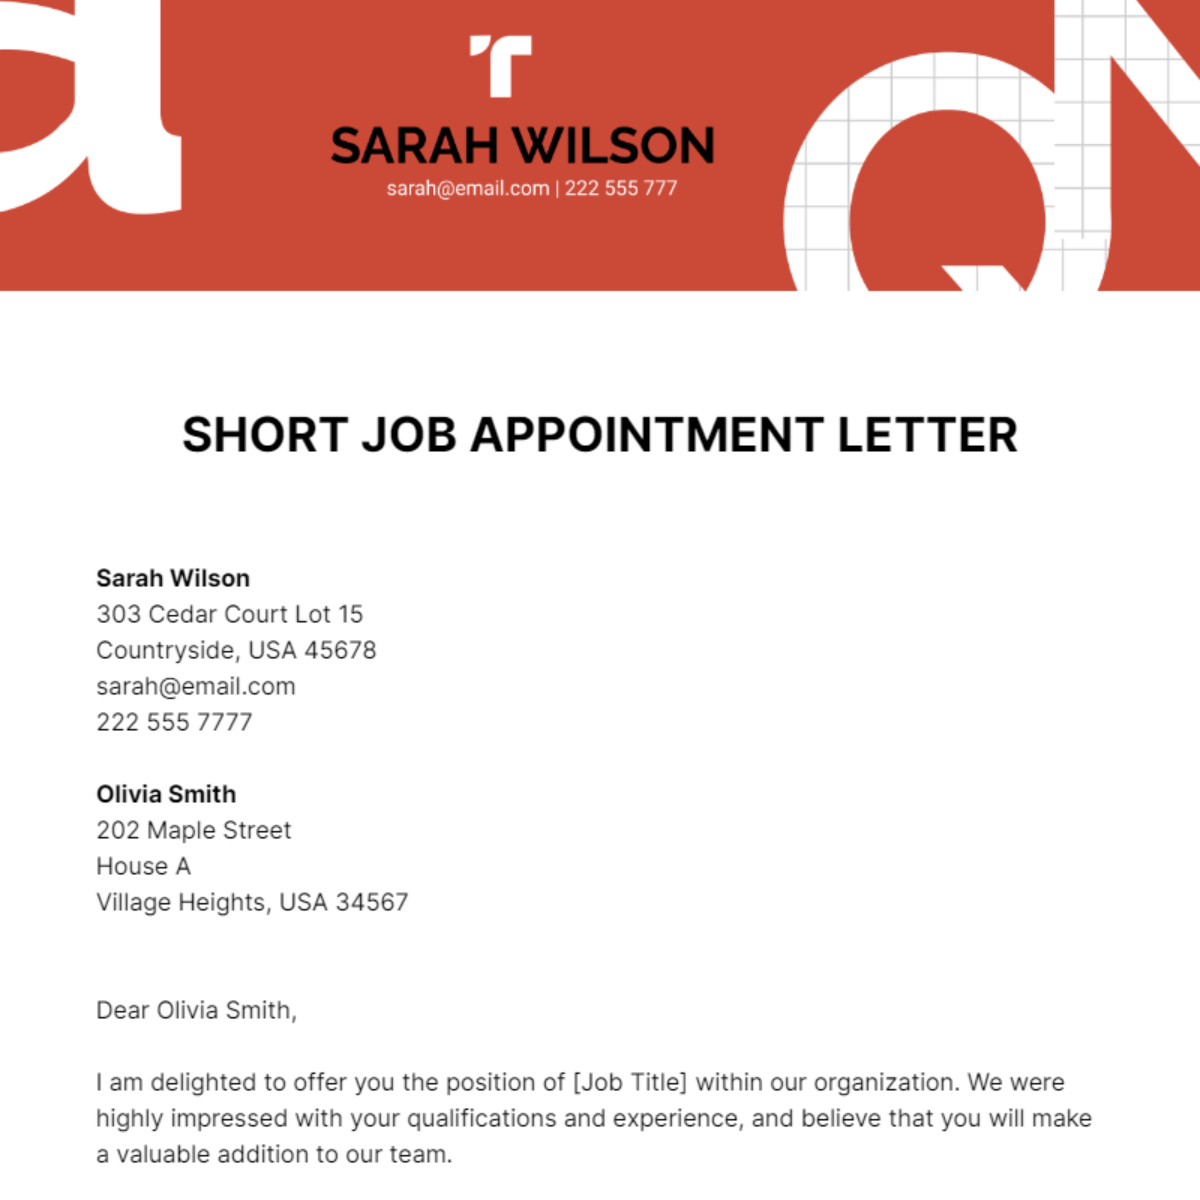 Short Job Appointment Letter Template